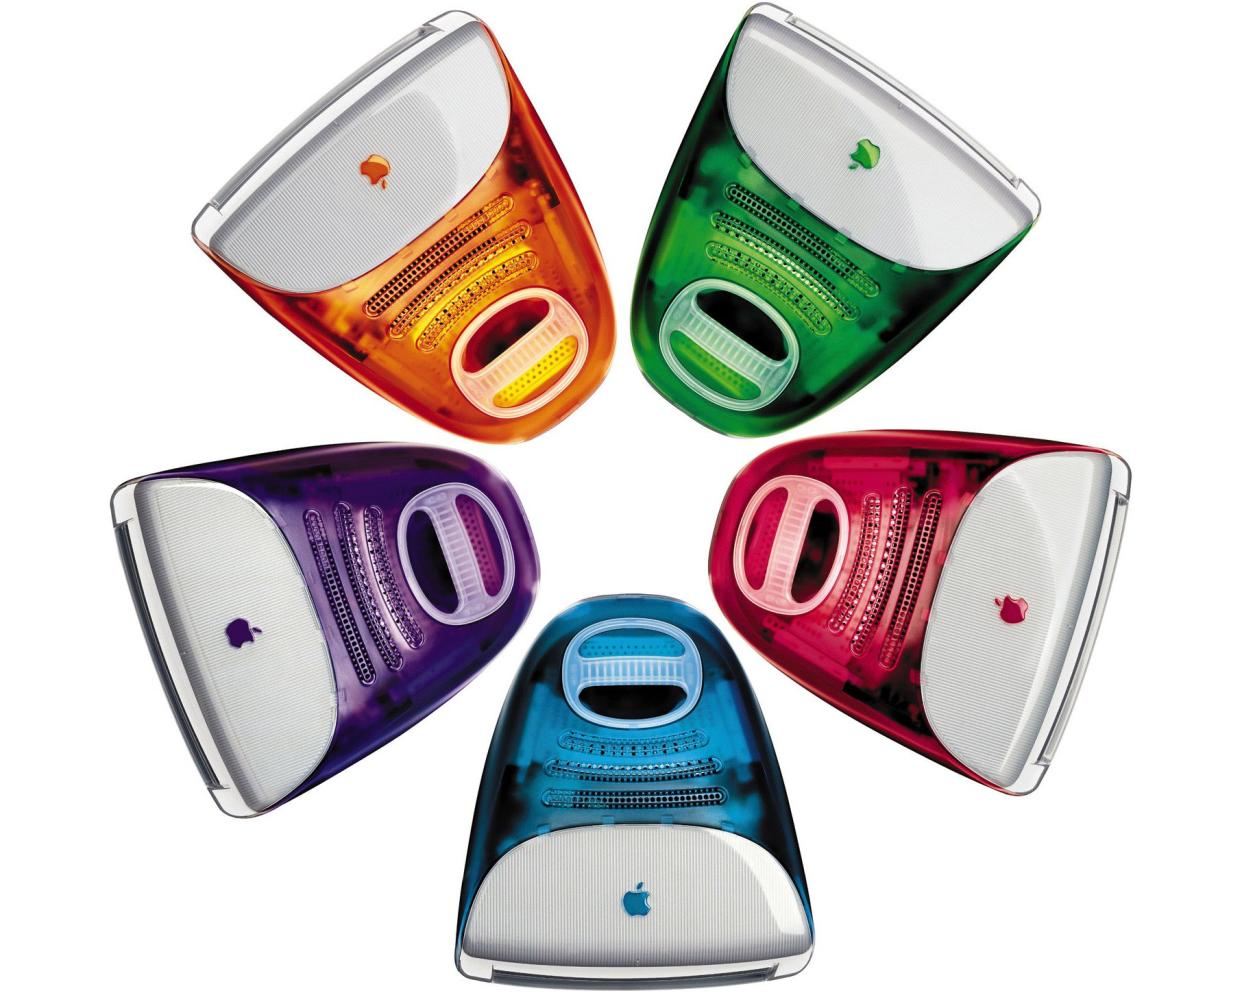 Apple Computer Inc. Intensified Its Challenge To Conventional Computer Design January 5, 1999 By Unveiling Five Bright New Colors For Its Unusual-Looking Imac Desktop Machine.